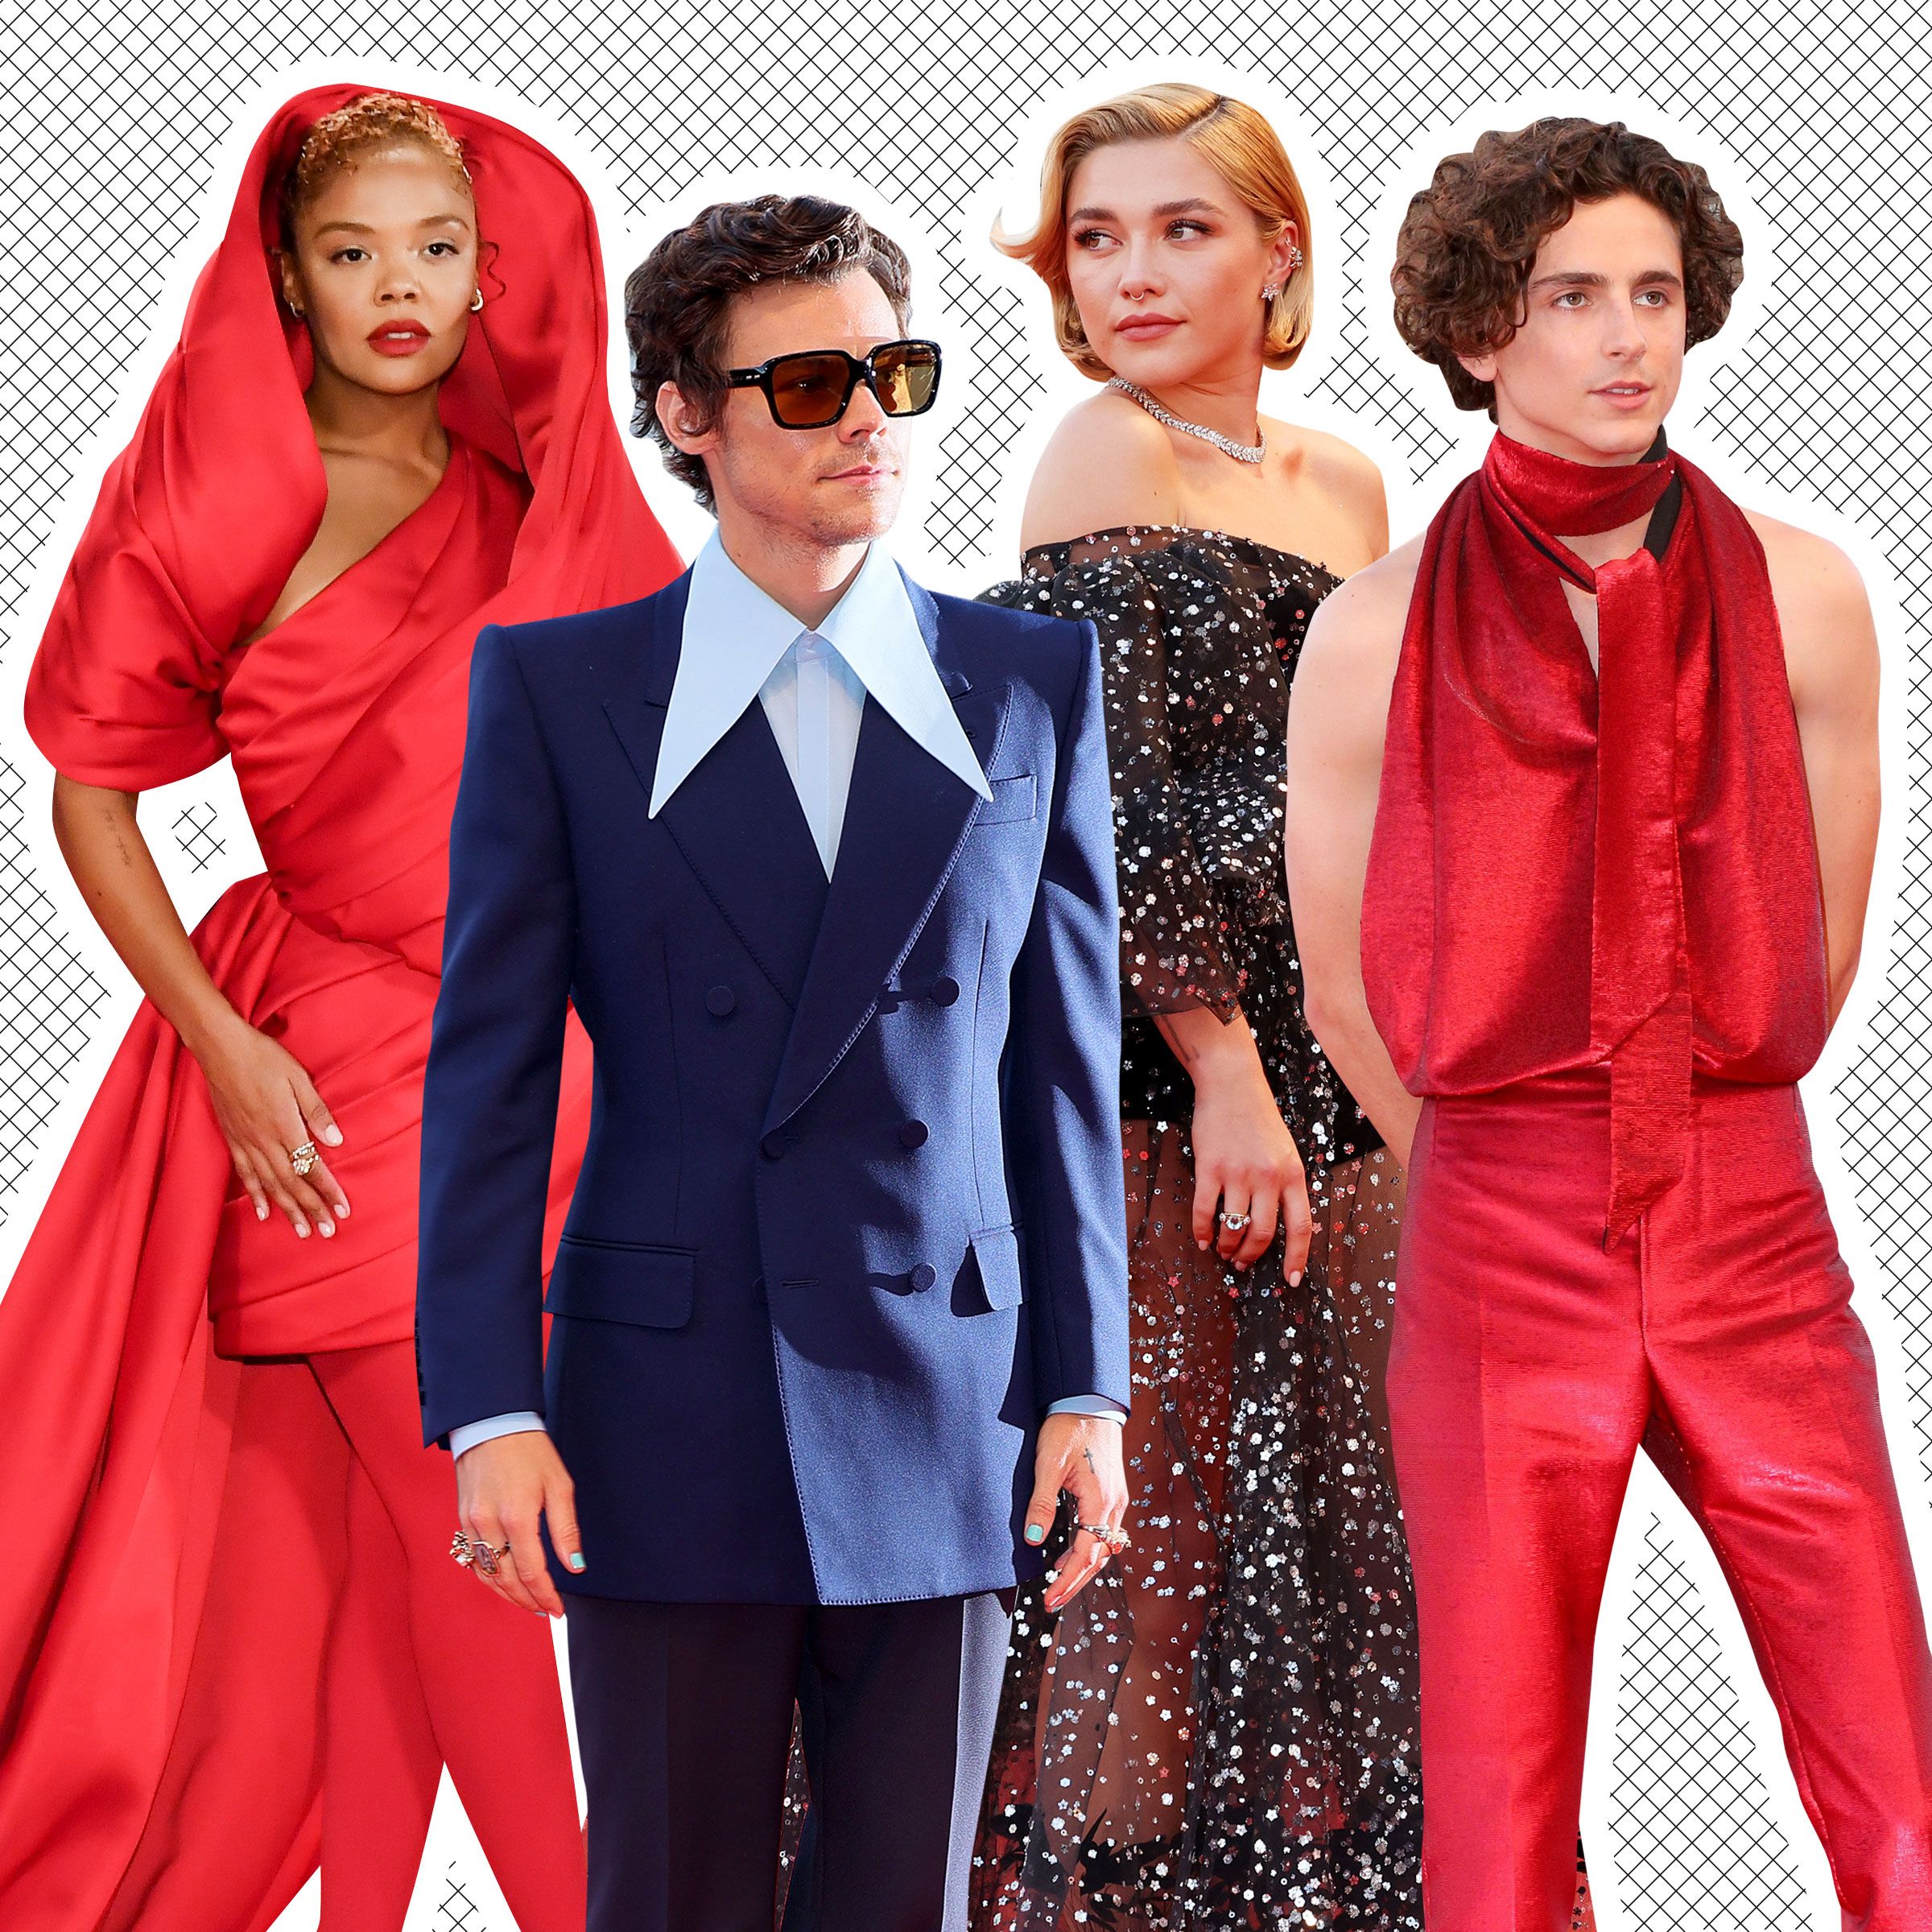 The 56 Best Looks From the Venice Film Festival